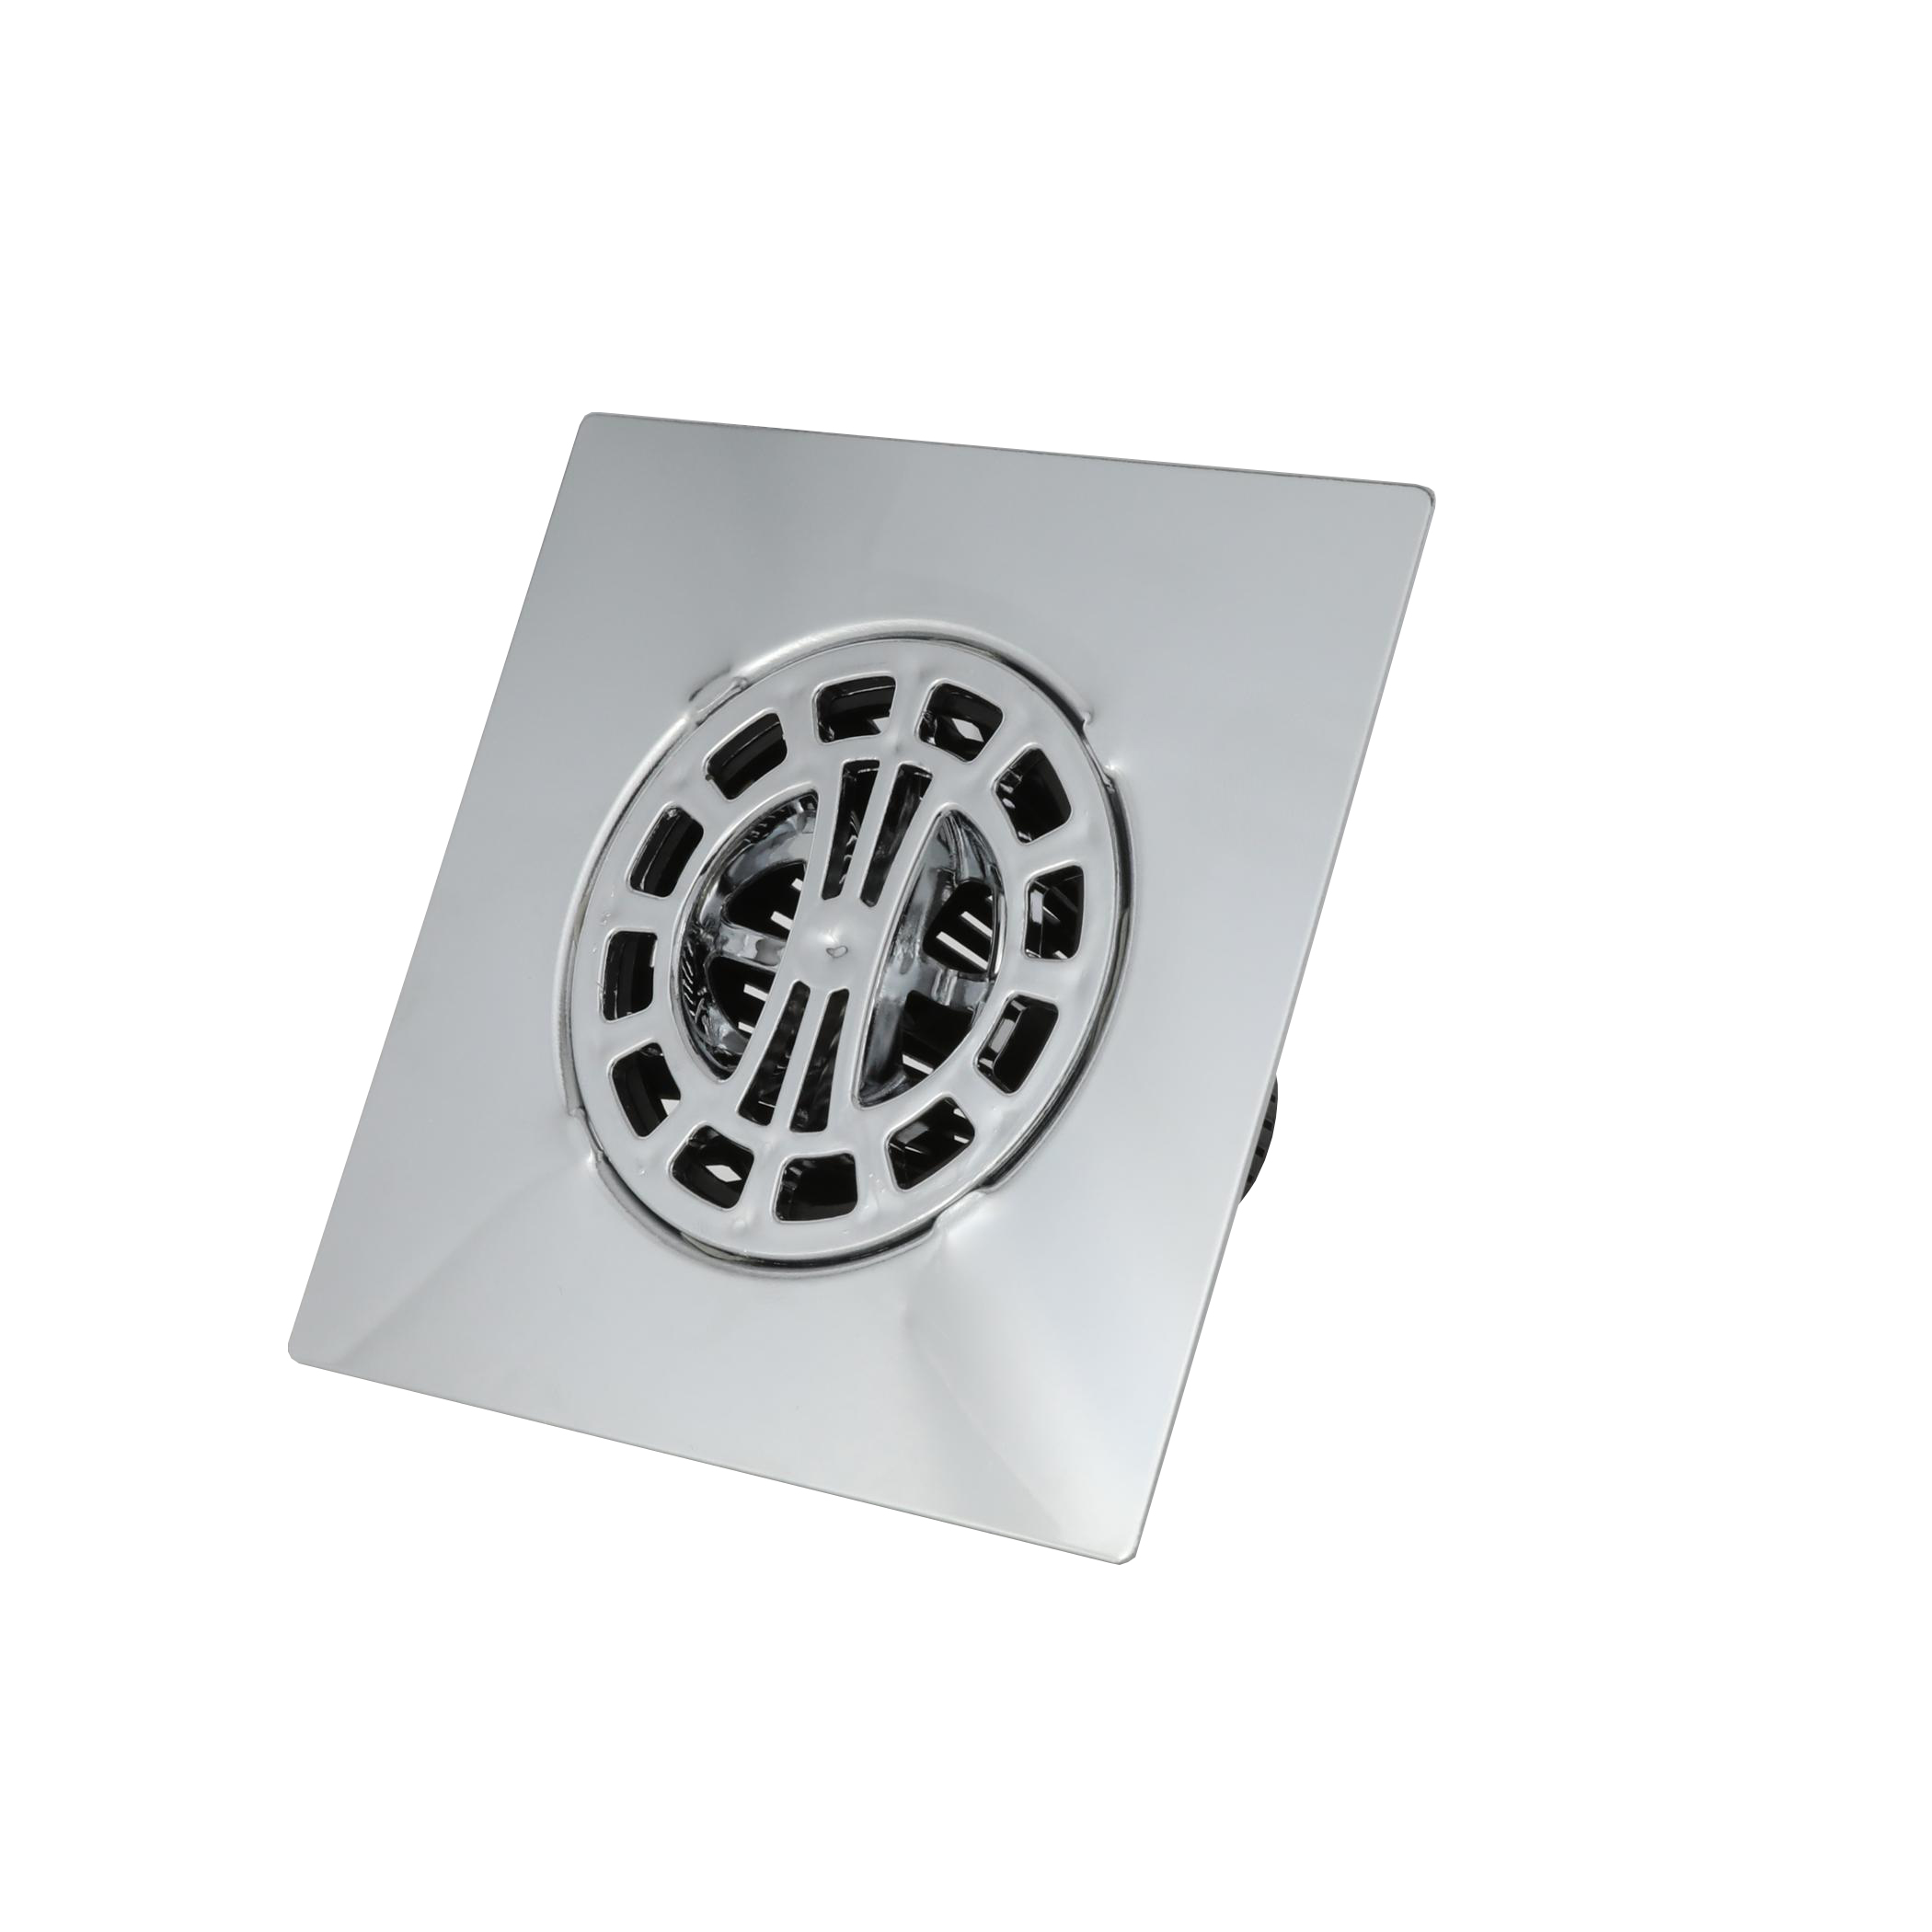 Danco 10529 Chrome Hair Catcher Shower Drain Cover, For Standard 3-Inch  Stand-Alone Shower Enclosures at Sutherlands